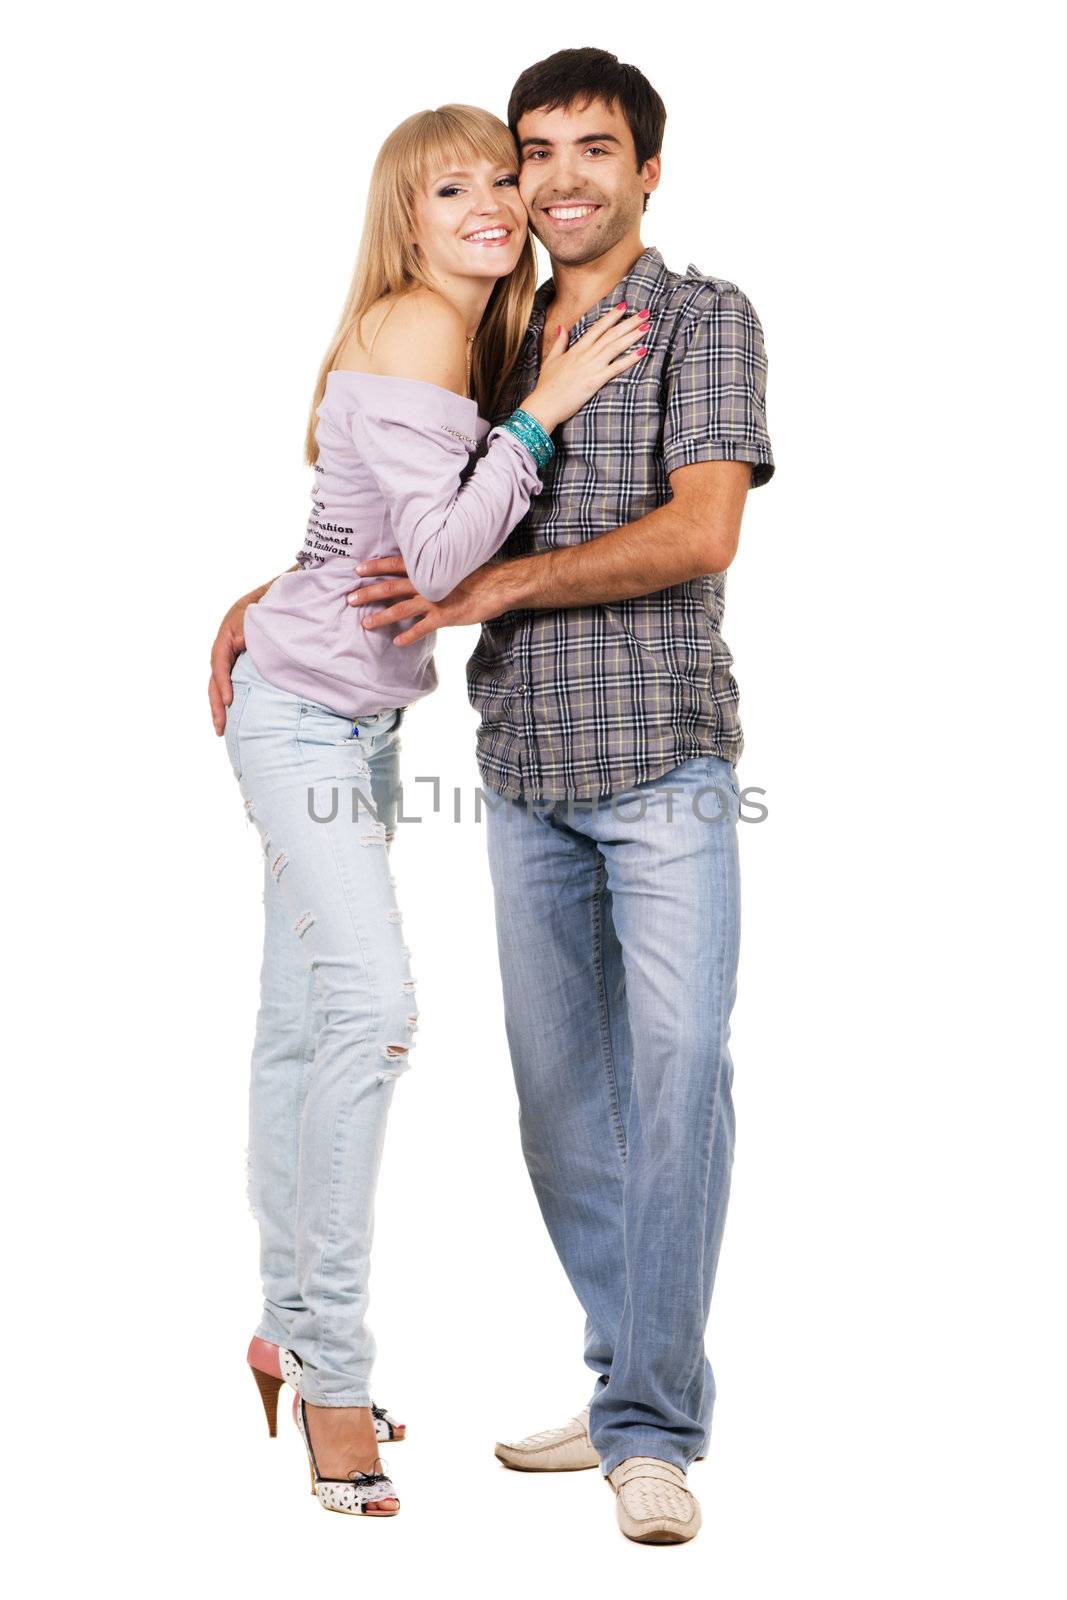 Romantic young couple in casual clothing, white background